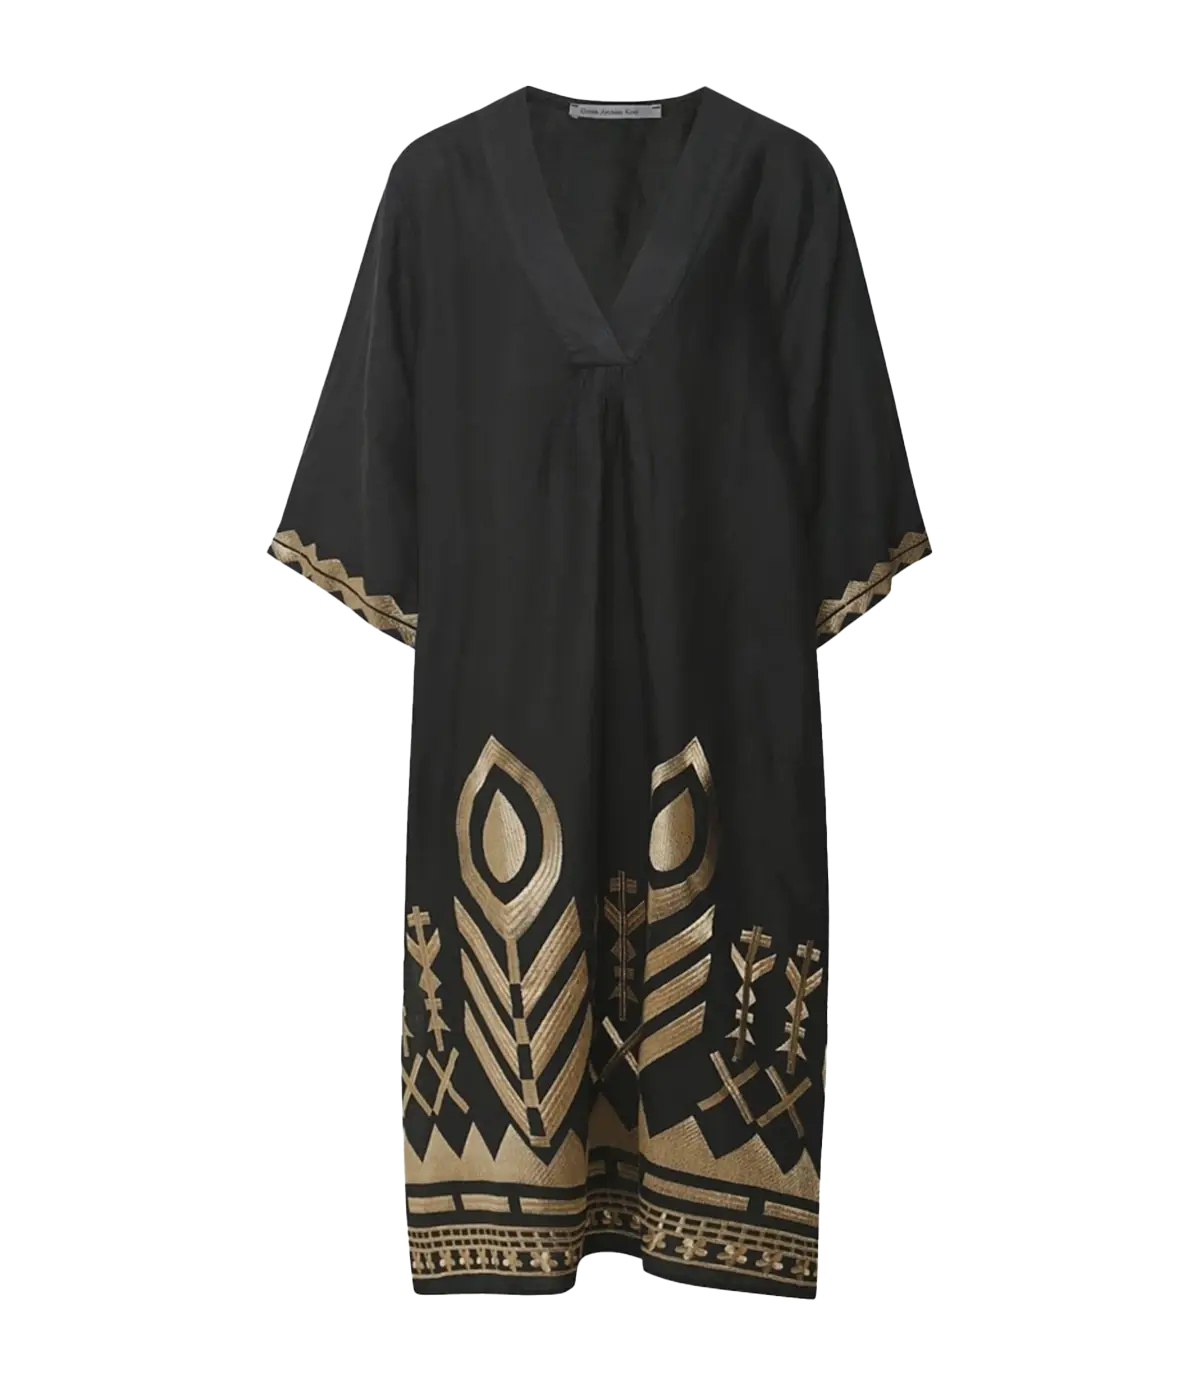 A greek inspired midi dress in a charcoal and gold embroidery. Short sleeves, v neckline, midi length, 100% linen. Throw on and go, bra friendly, summer staple, lightweight, made in greece.